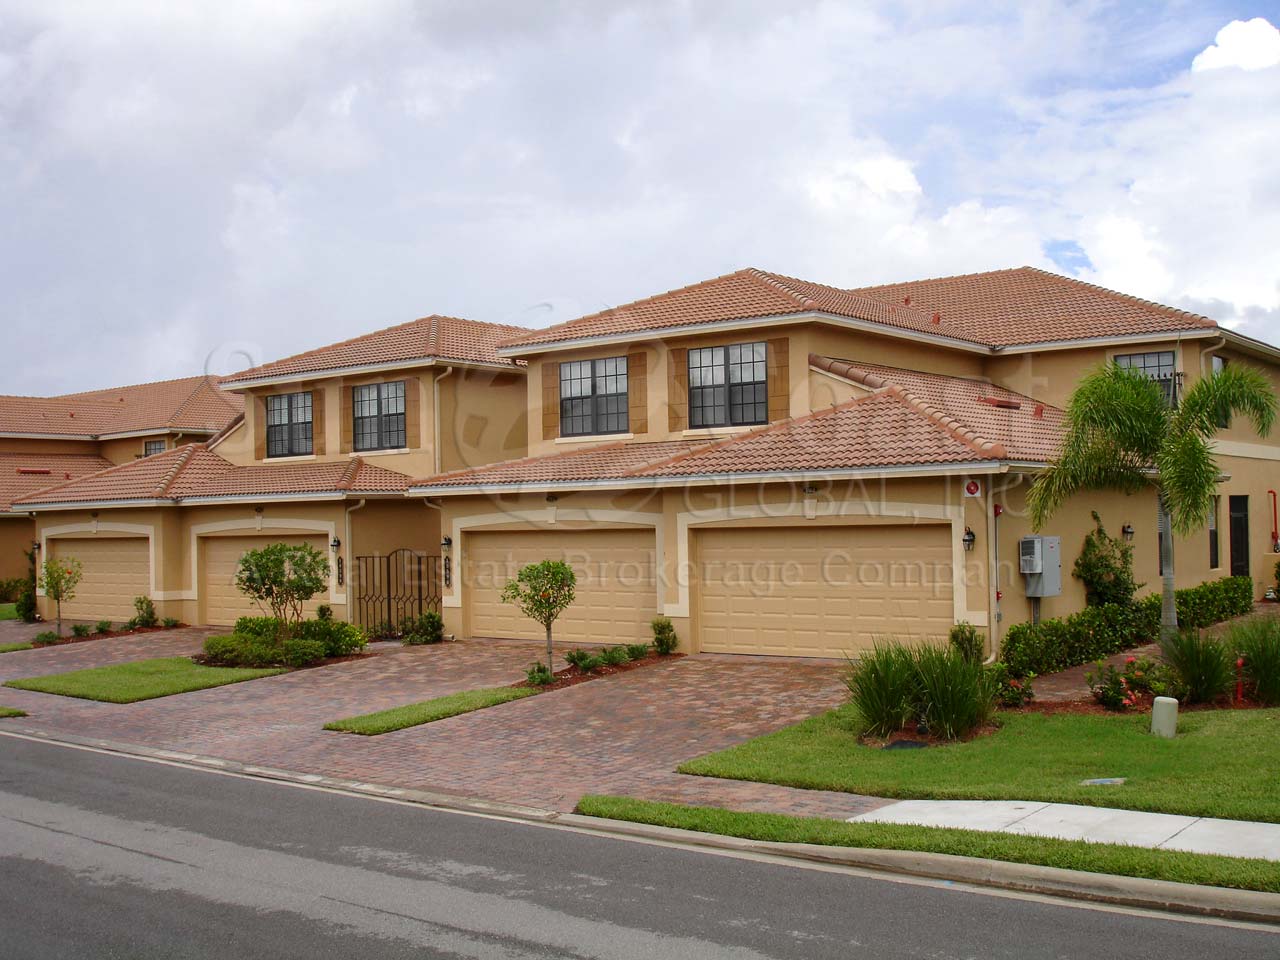 HERITAGE BAY waterfront coach homes with tile roofs, pavered drive and 2-car attached garages